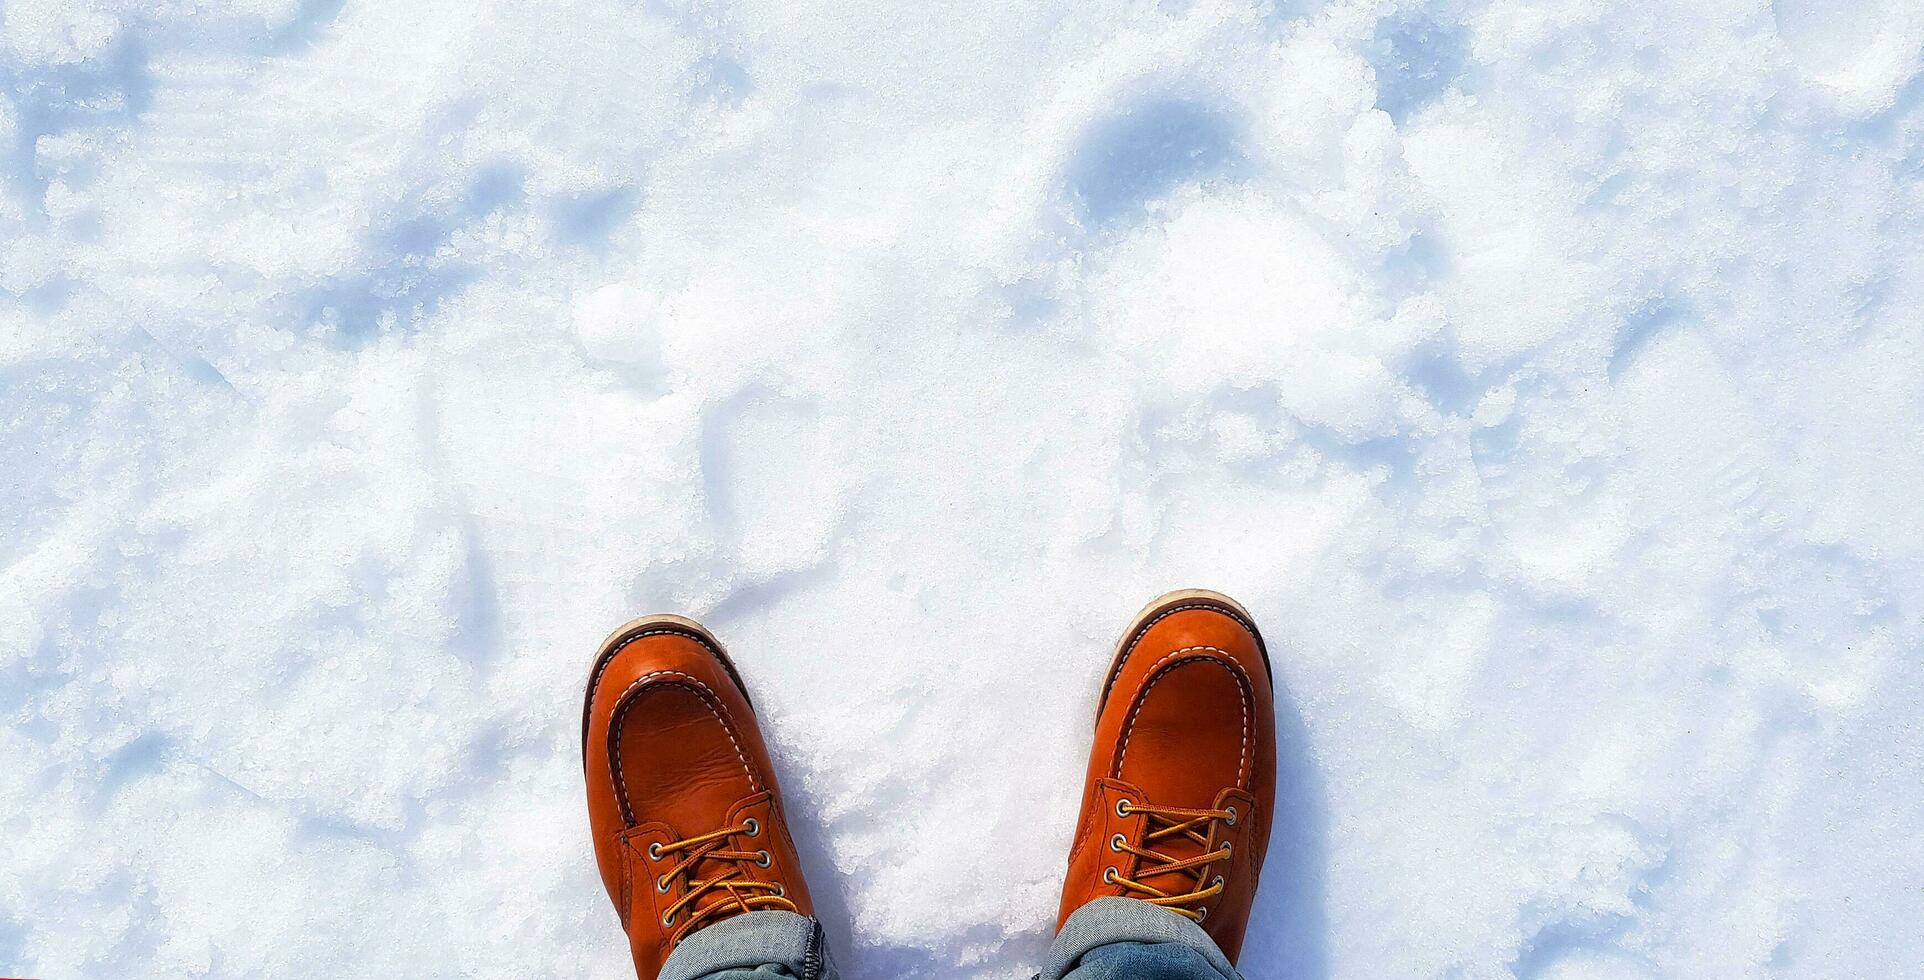 Top view or Flat lay of man's legs in blue jeans and wearing red or brown leather boots or snowshoes on snow with copy space on above. photo